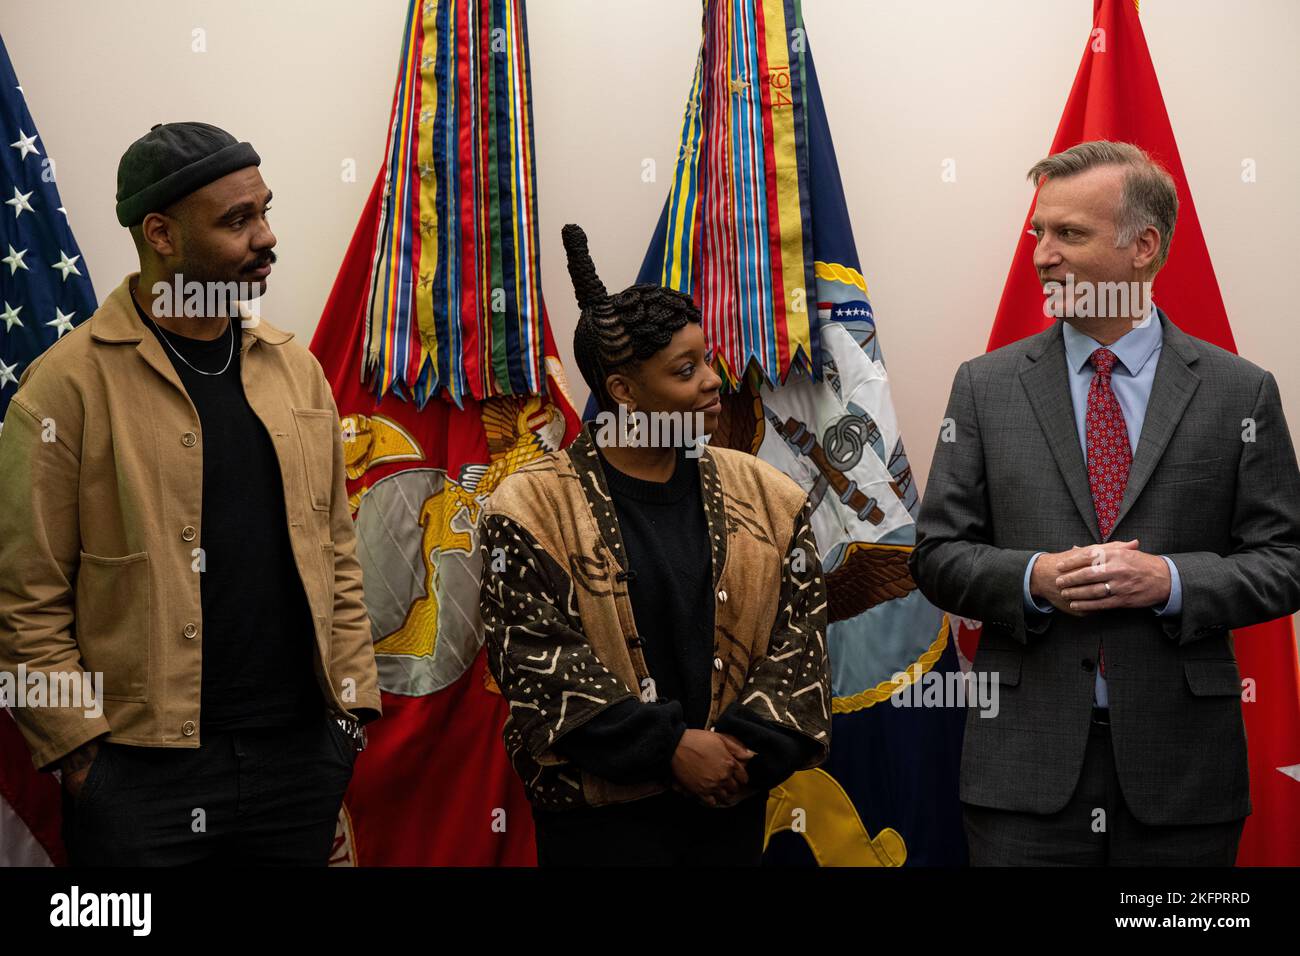 Arlington, United States Of America. 18th Nov, 2022. Arlington, United States of America. 18 November, 2022. American film director J.D. Dillard, left, and actor Christina Jackson, center, discuss their movie, 'Devotion' with Under Secretary of the Navy Erik Raven, right, following a tour of the Pentagon November 18, 2022 in Washington, DC The 2022 film is an American biographical war drama about elite fighter pilots during the Korean War. Credit: PO2 Alexander Kubitza/DOD/Alamy Live News Stock Photo